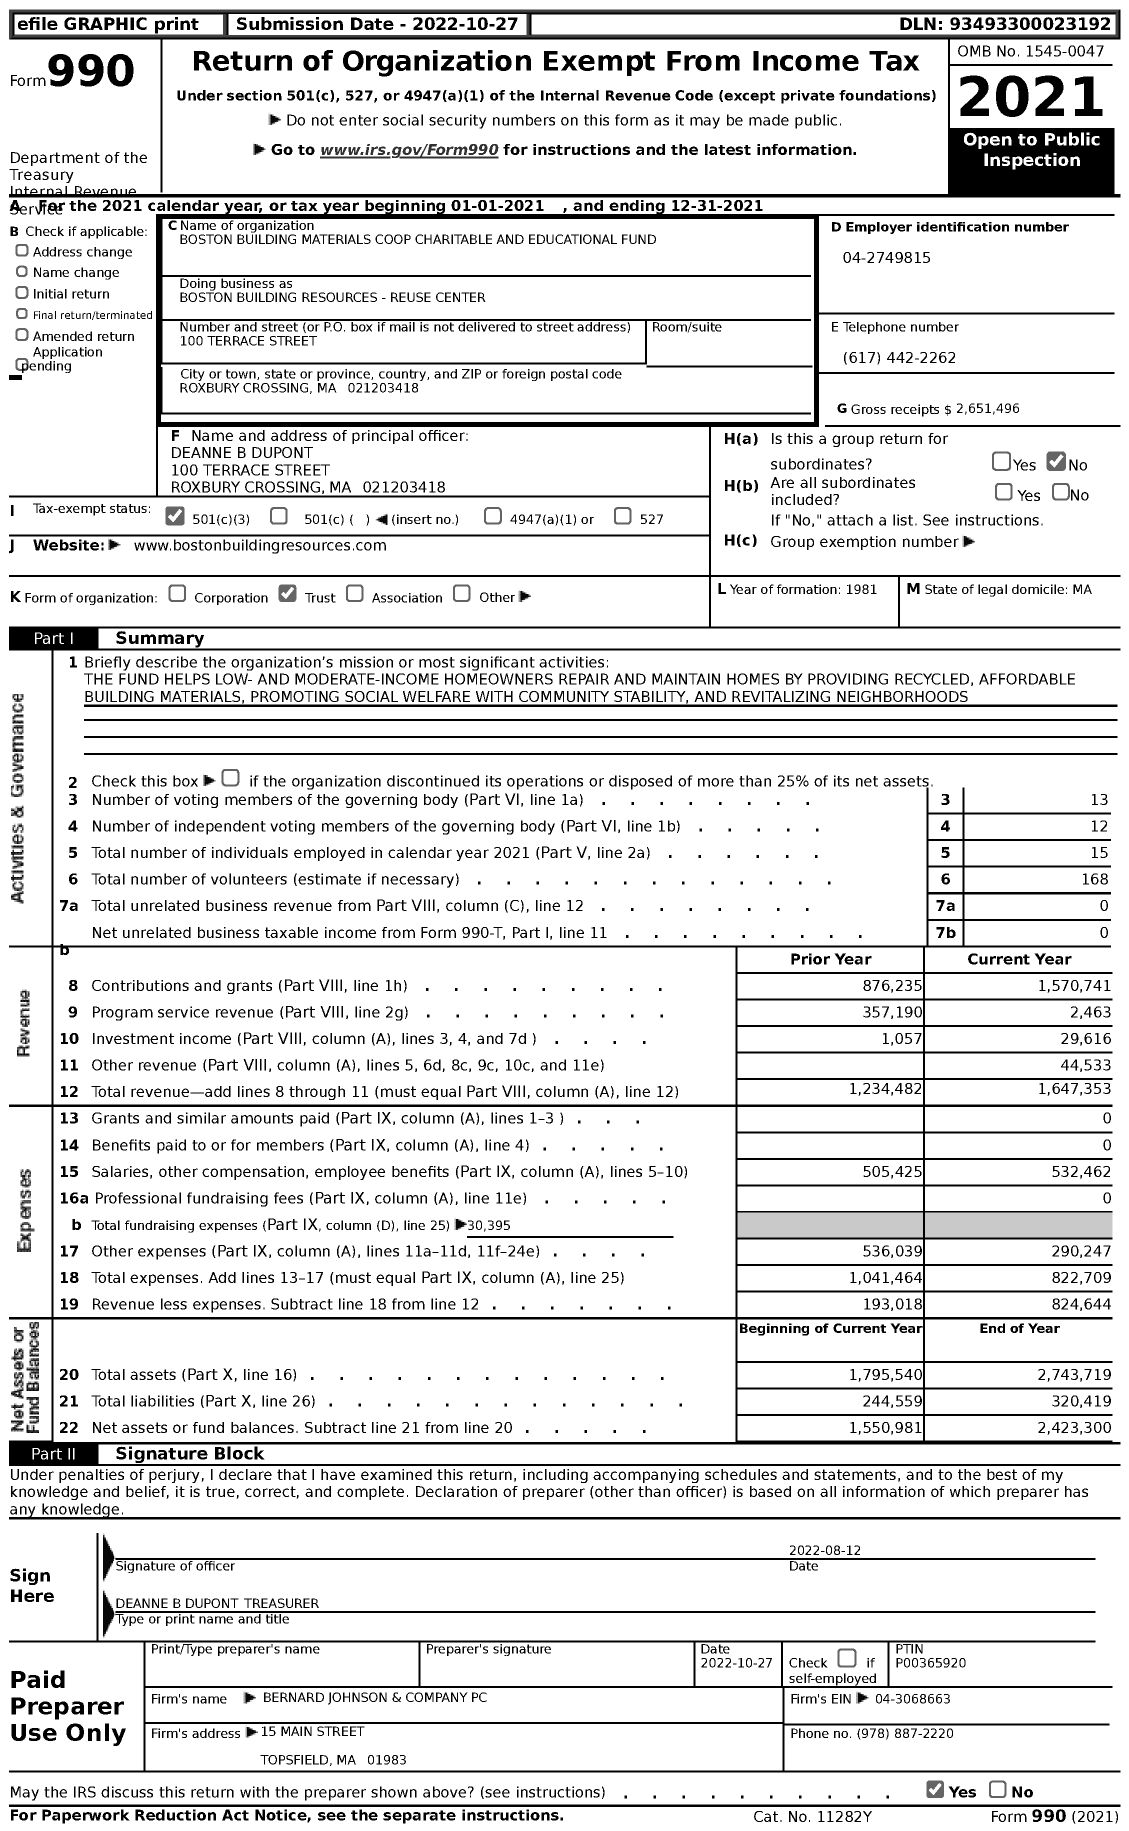 Image of first page of 2021 Form 990 for Boston Building Resources - Reuse Center (BBR)